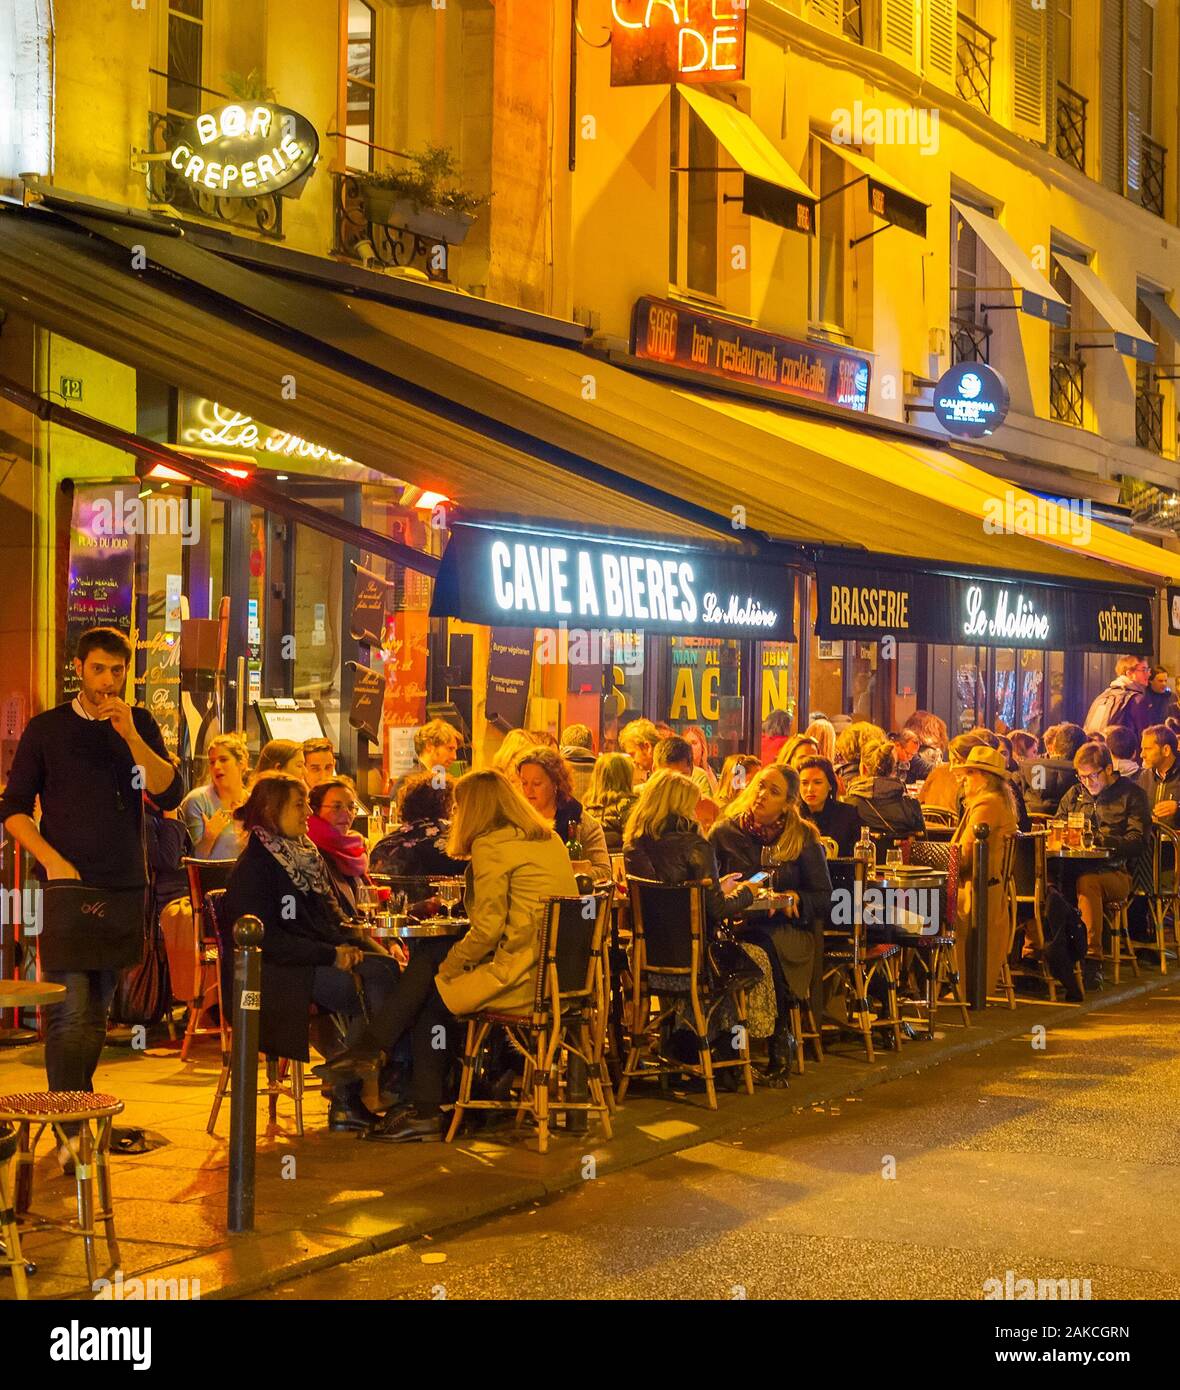 PARIS, FRANCE - NOVEMBER 09, 2018: People at a street restaurant in Paris at night. Paris is the most visited city in Europe Stock Photo